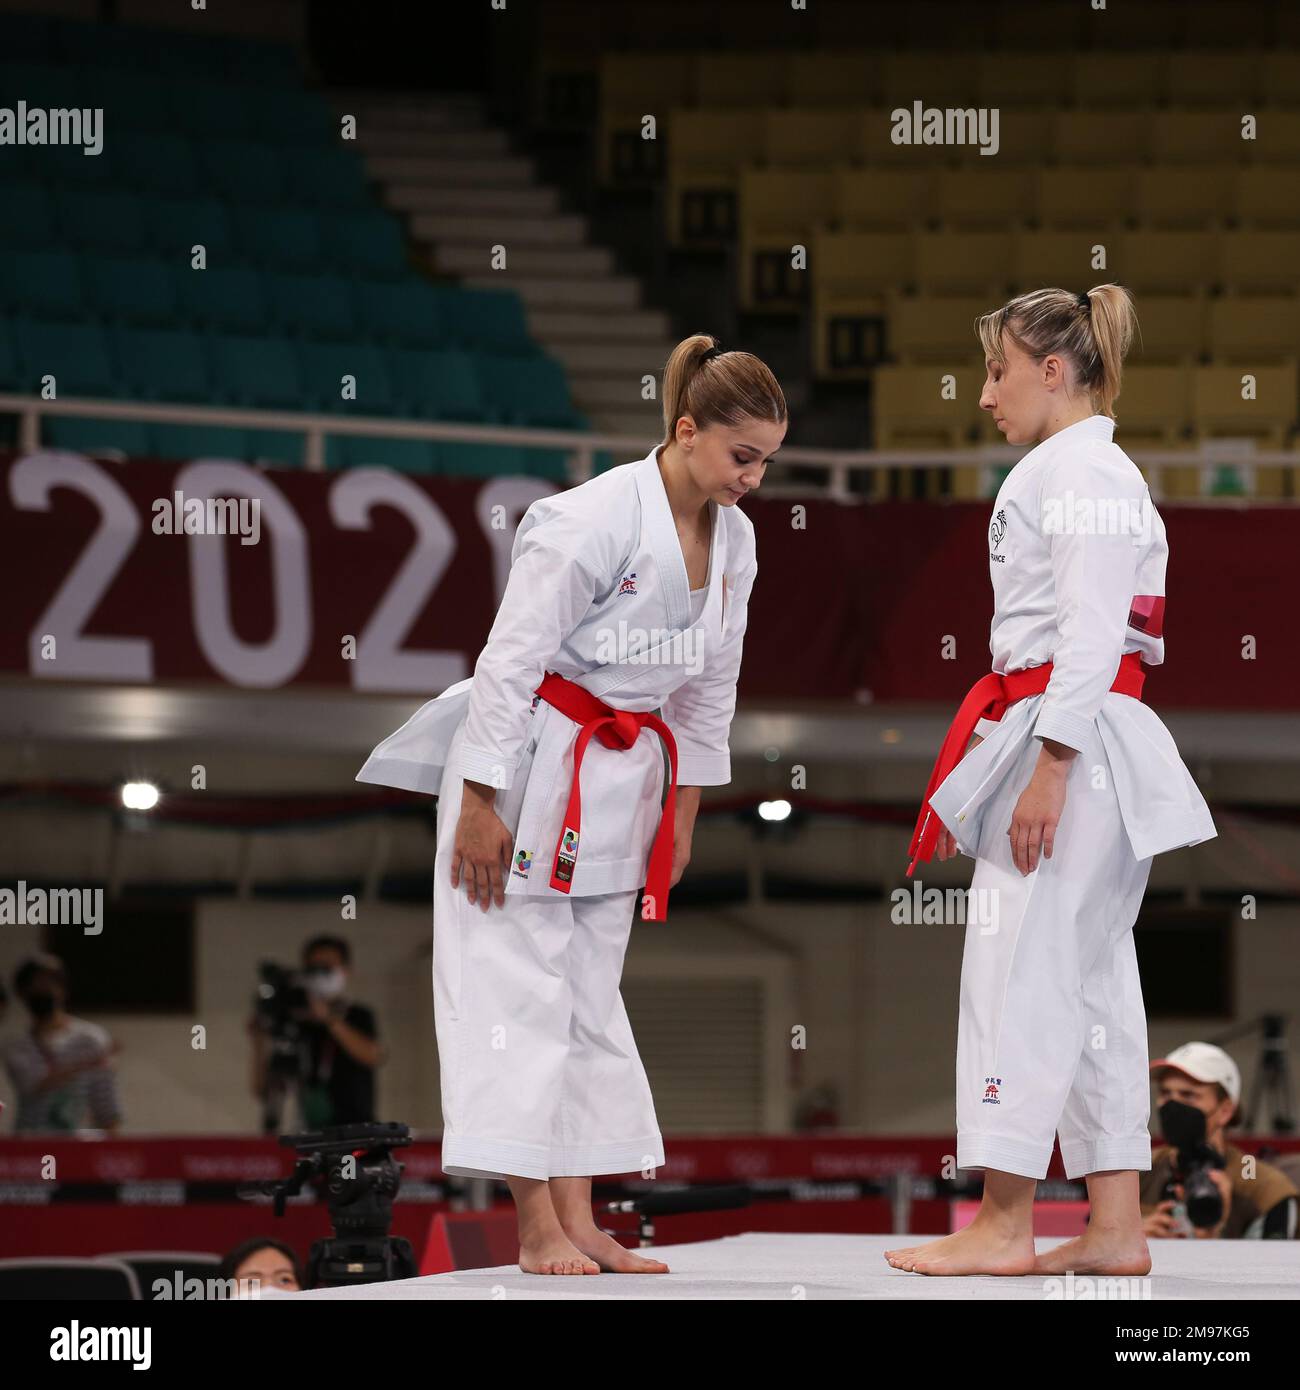 AUG 5, 2021 - TOKYO, JAPAN: Dilara BOZAN of Turkey and Alexandra FERACCI of France compete in the Women's Kata Elimination Round at the Tokyo 2020 Olympic Games (Photo by Mickael Chavet/RX) Stock Photo